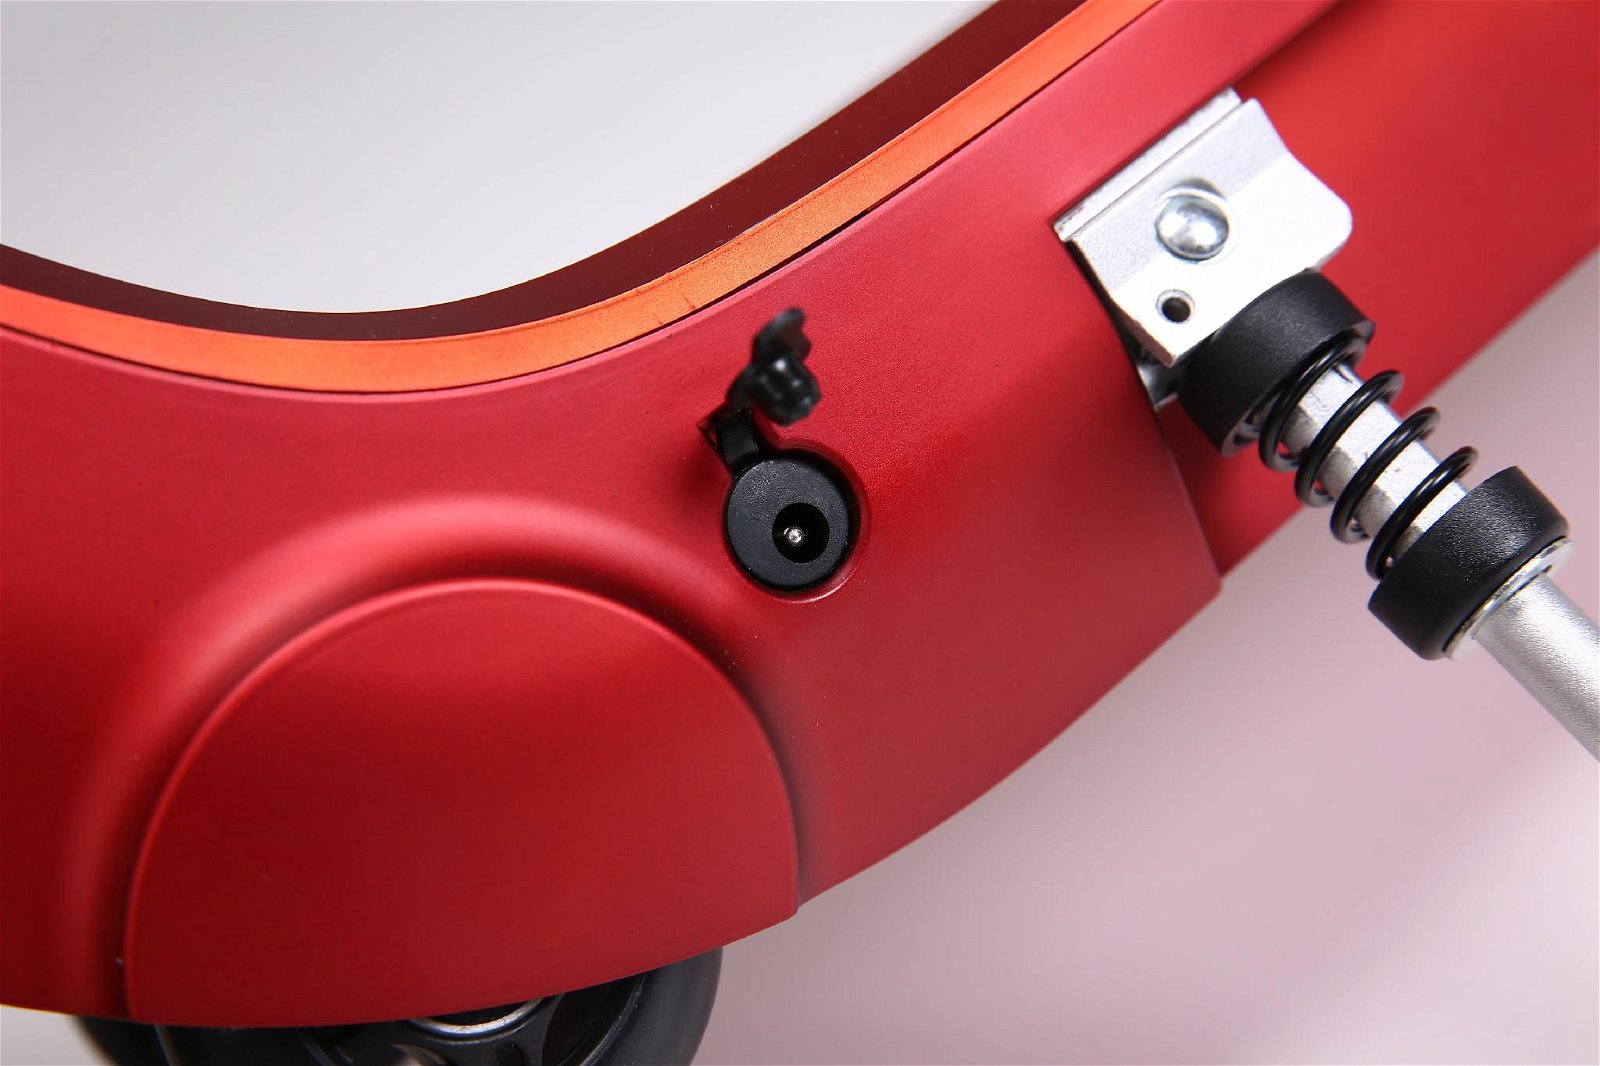 Music electric scooter music electric skateboard music ebike 4